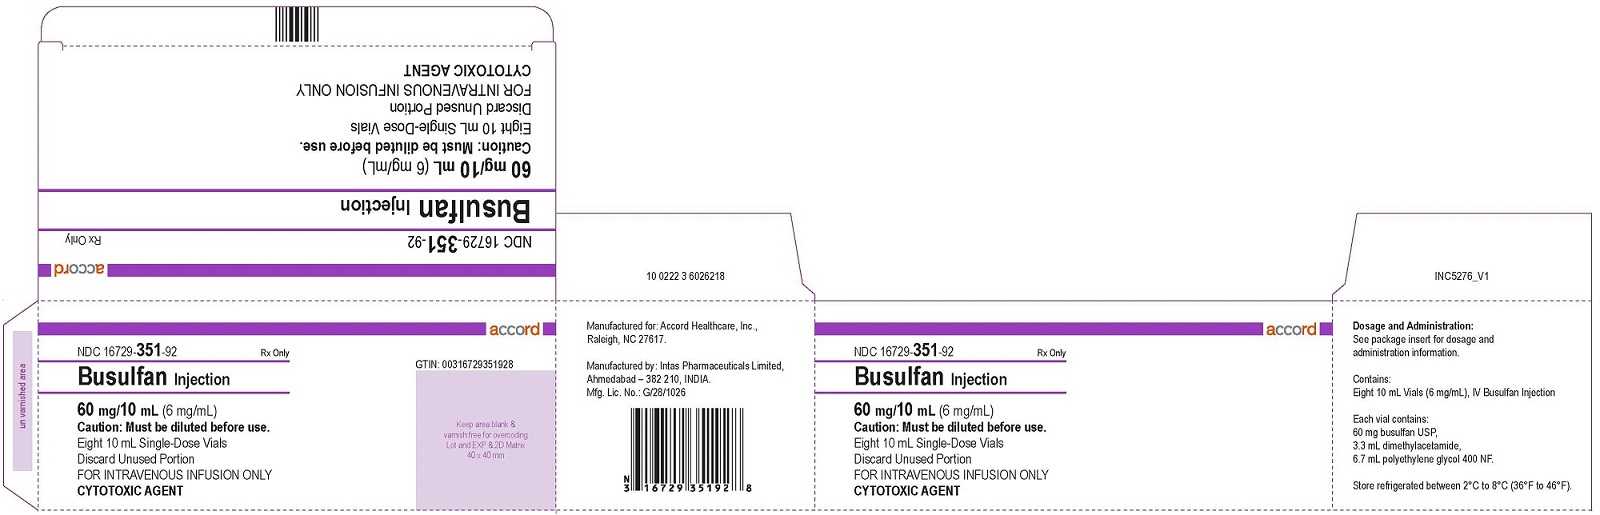 Carton Label for One Vial